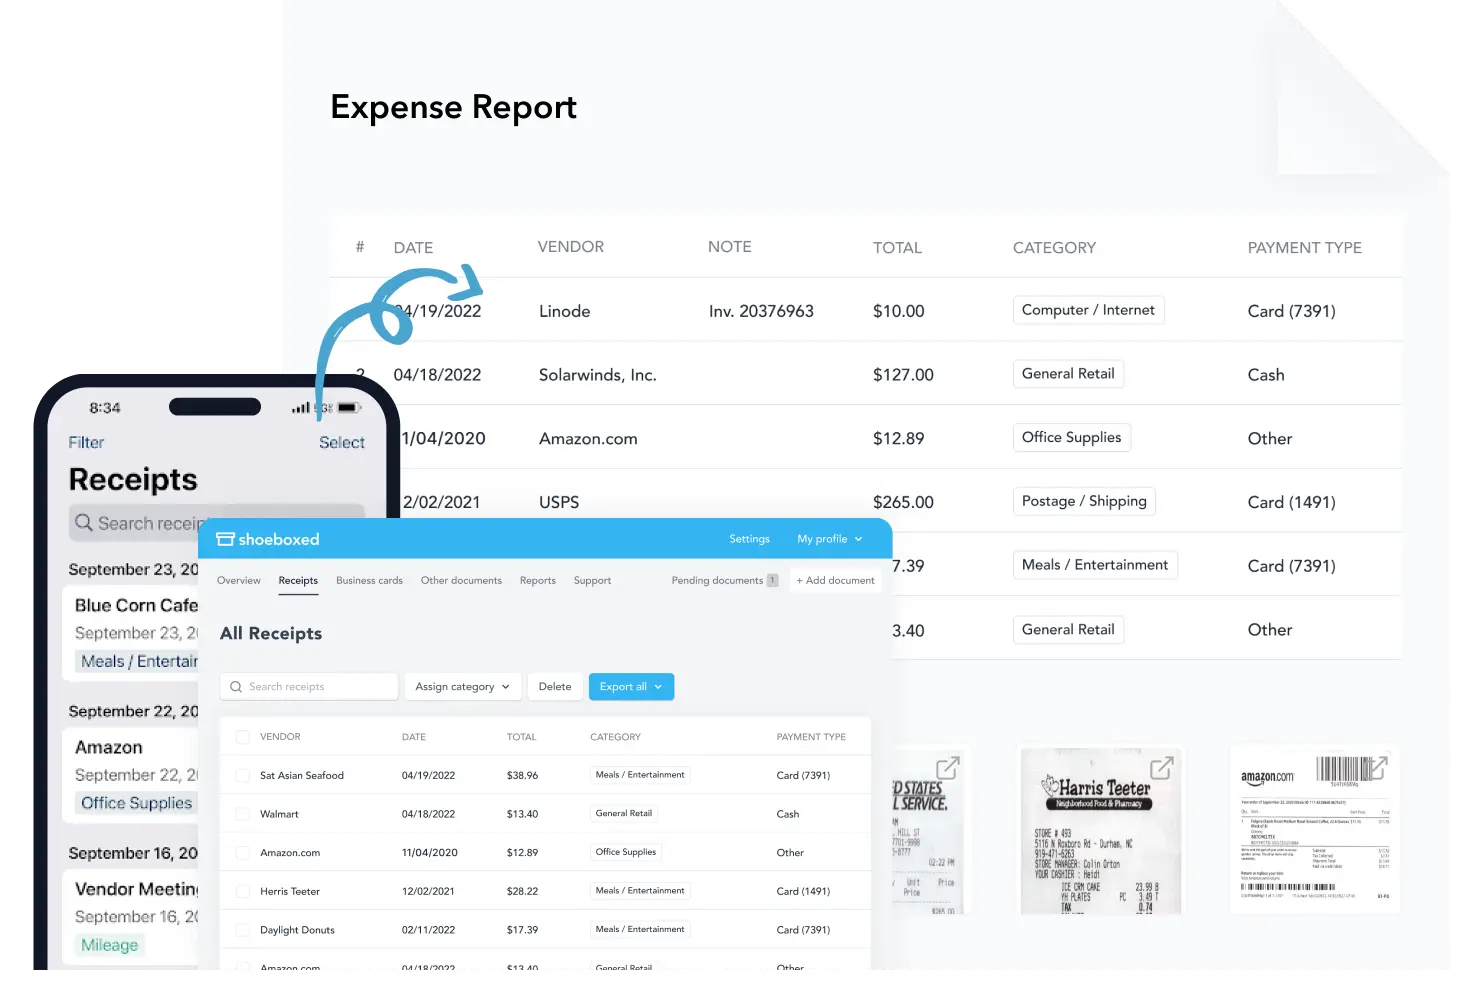 You can create comprehensive expense reports with just a few clicks.